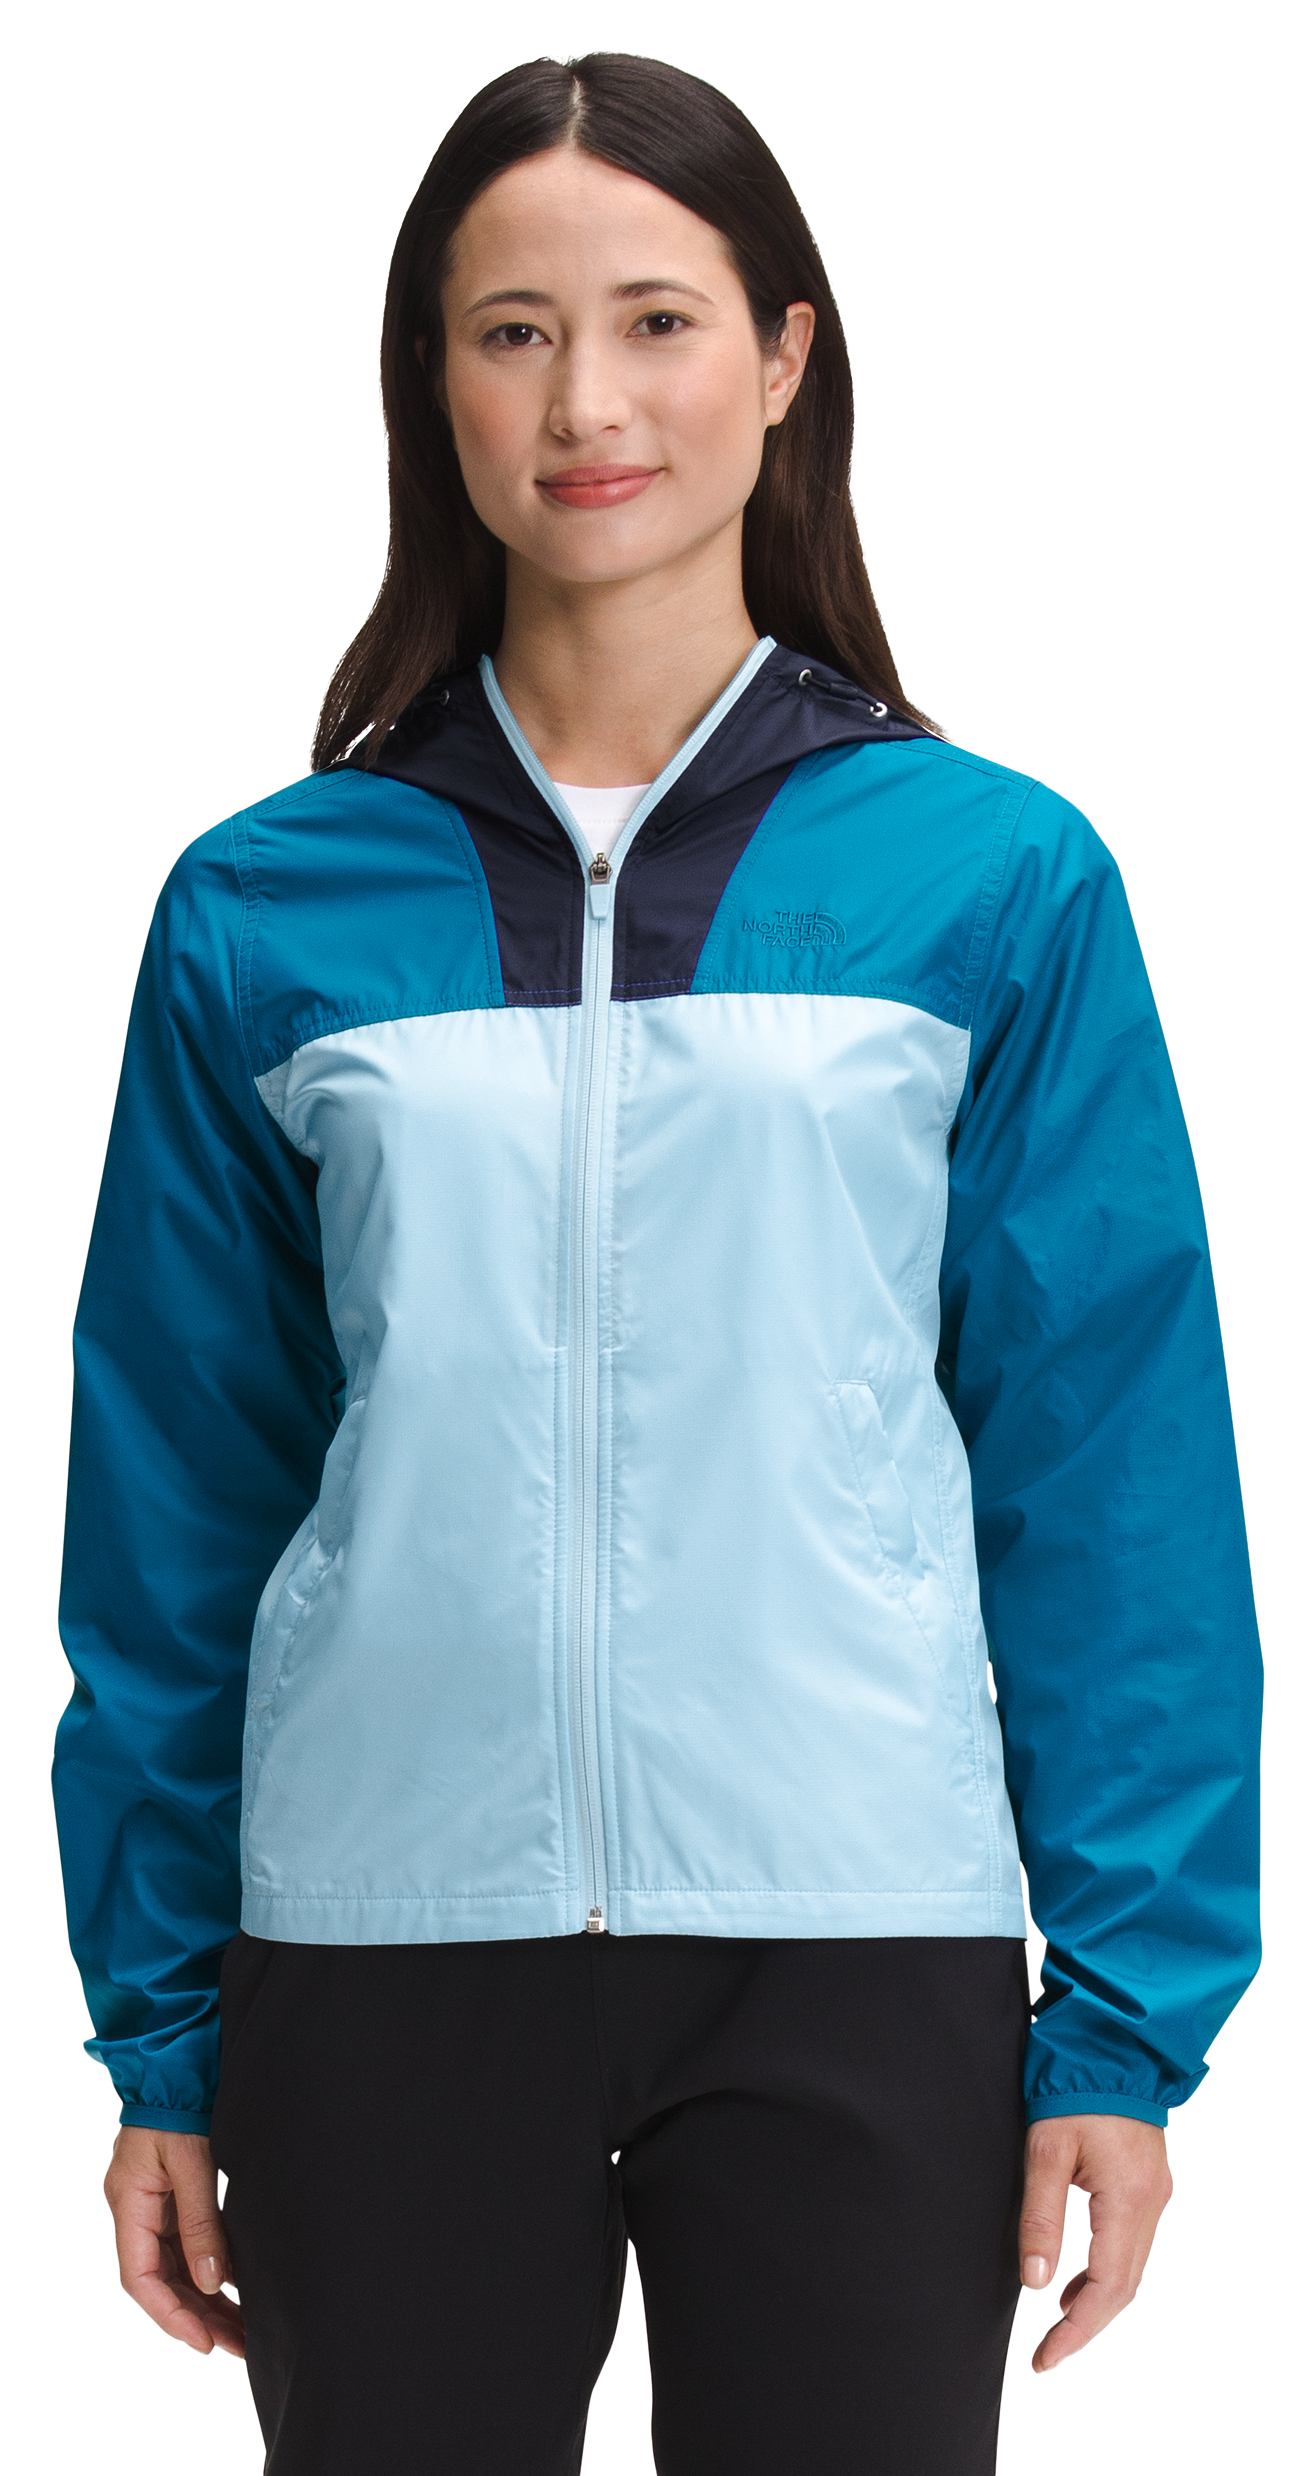 The North Face Cyclone Jacket for Ladies - Aviator Navy/Banff Blue/Beta Blue - S